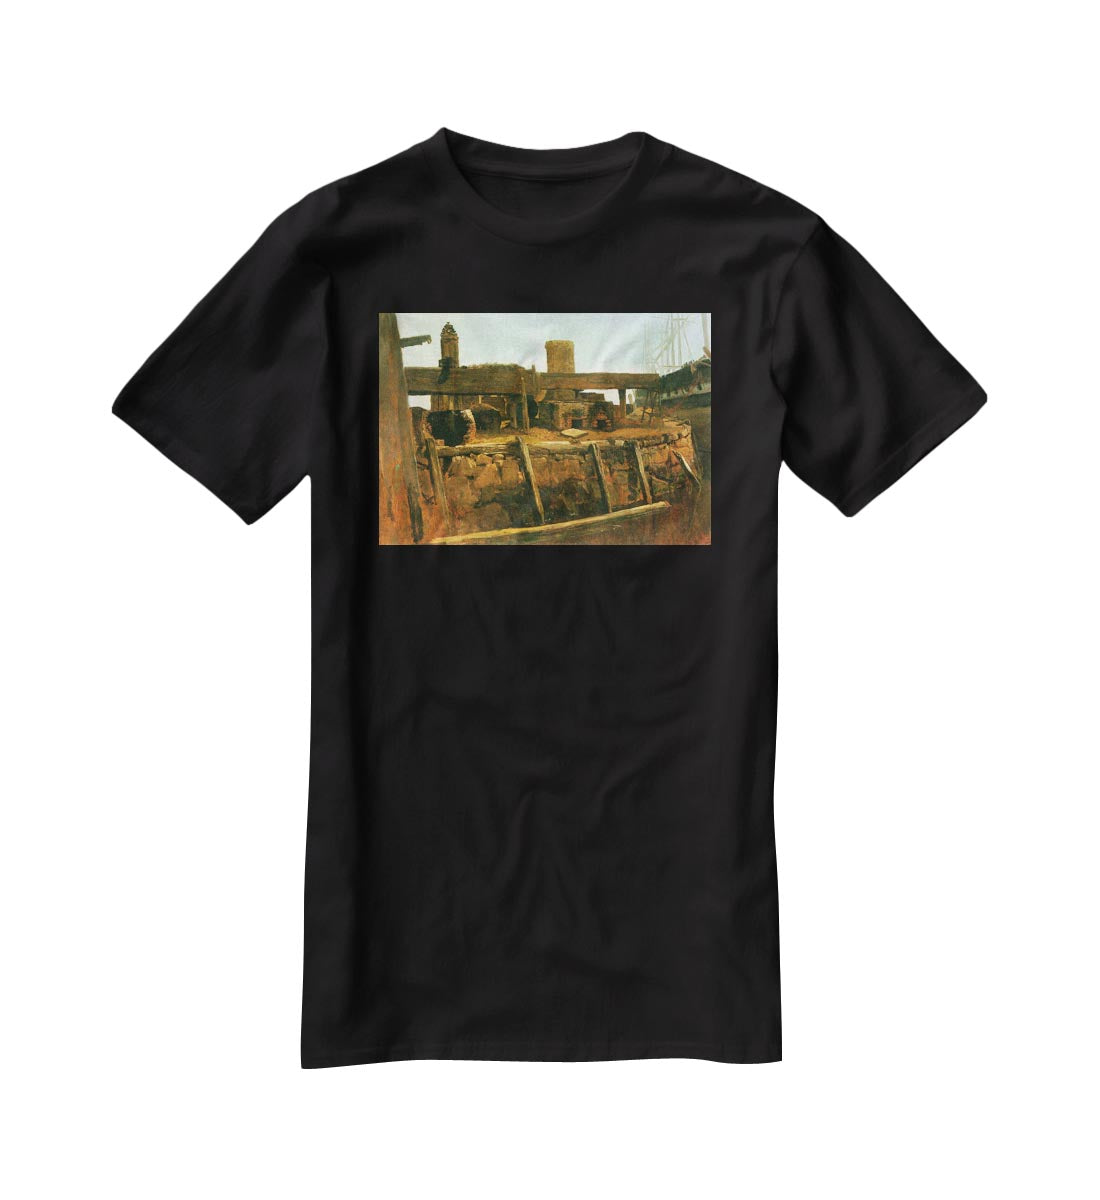 Boat at the dock by Bierstadt T-Shirt - Canvas Art Rocks - 1